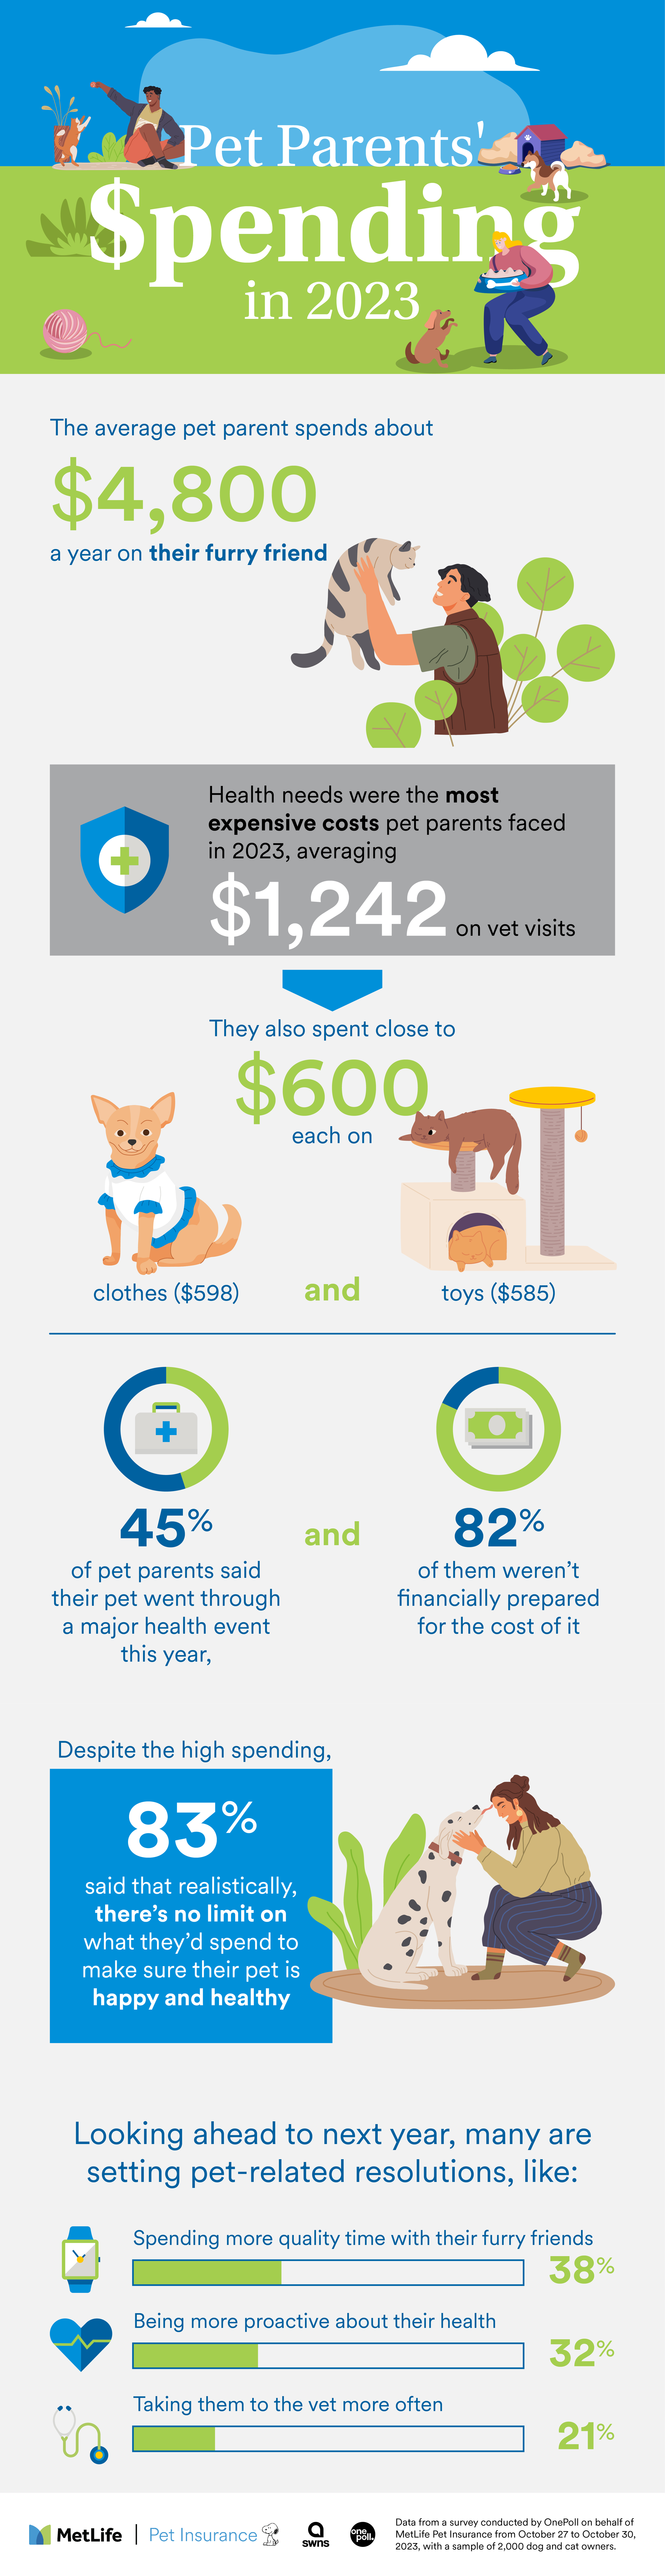 Infographic describing average yearly expenditure of owning a pet